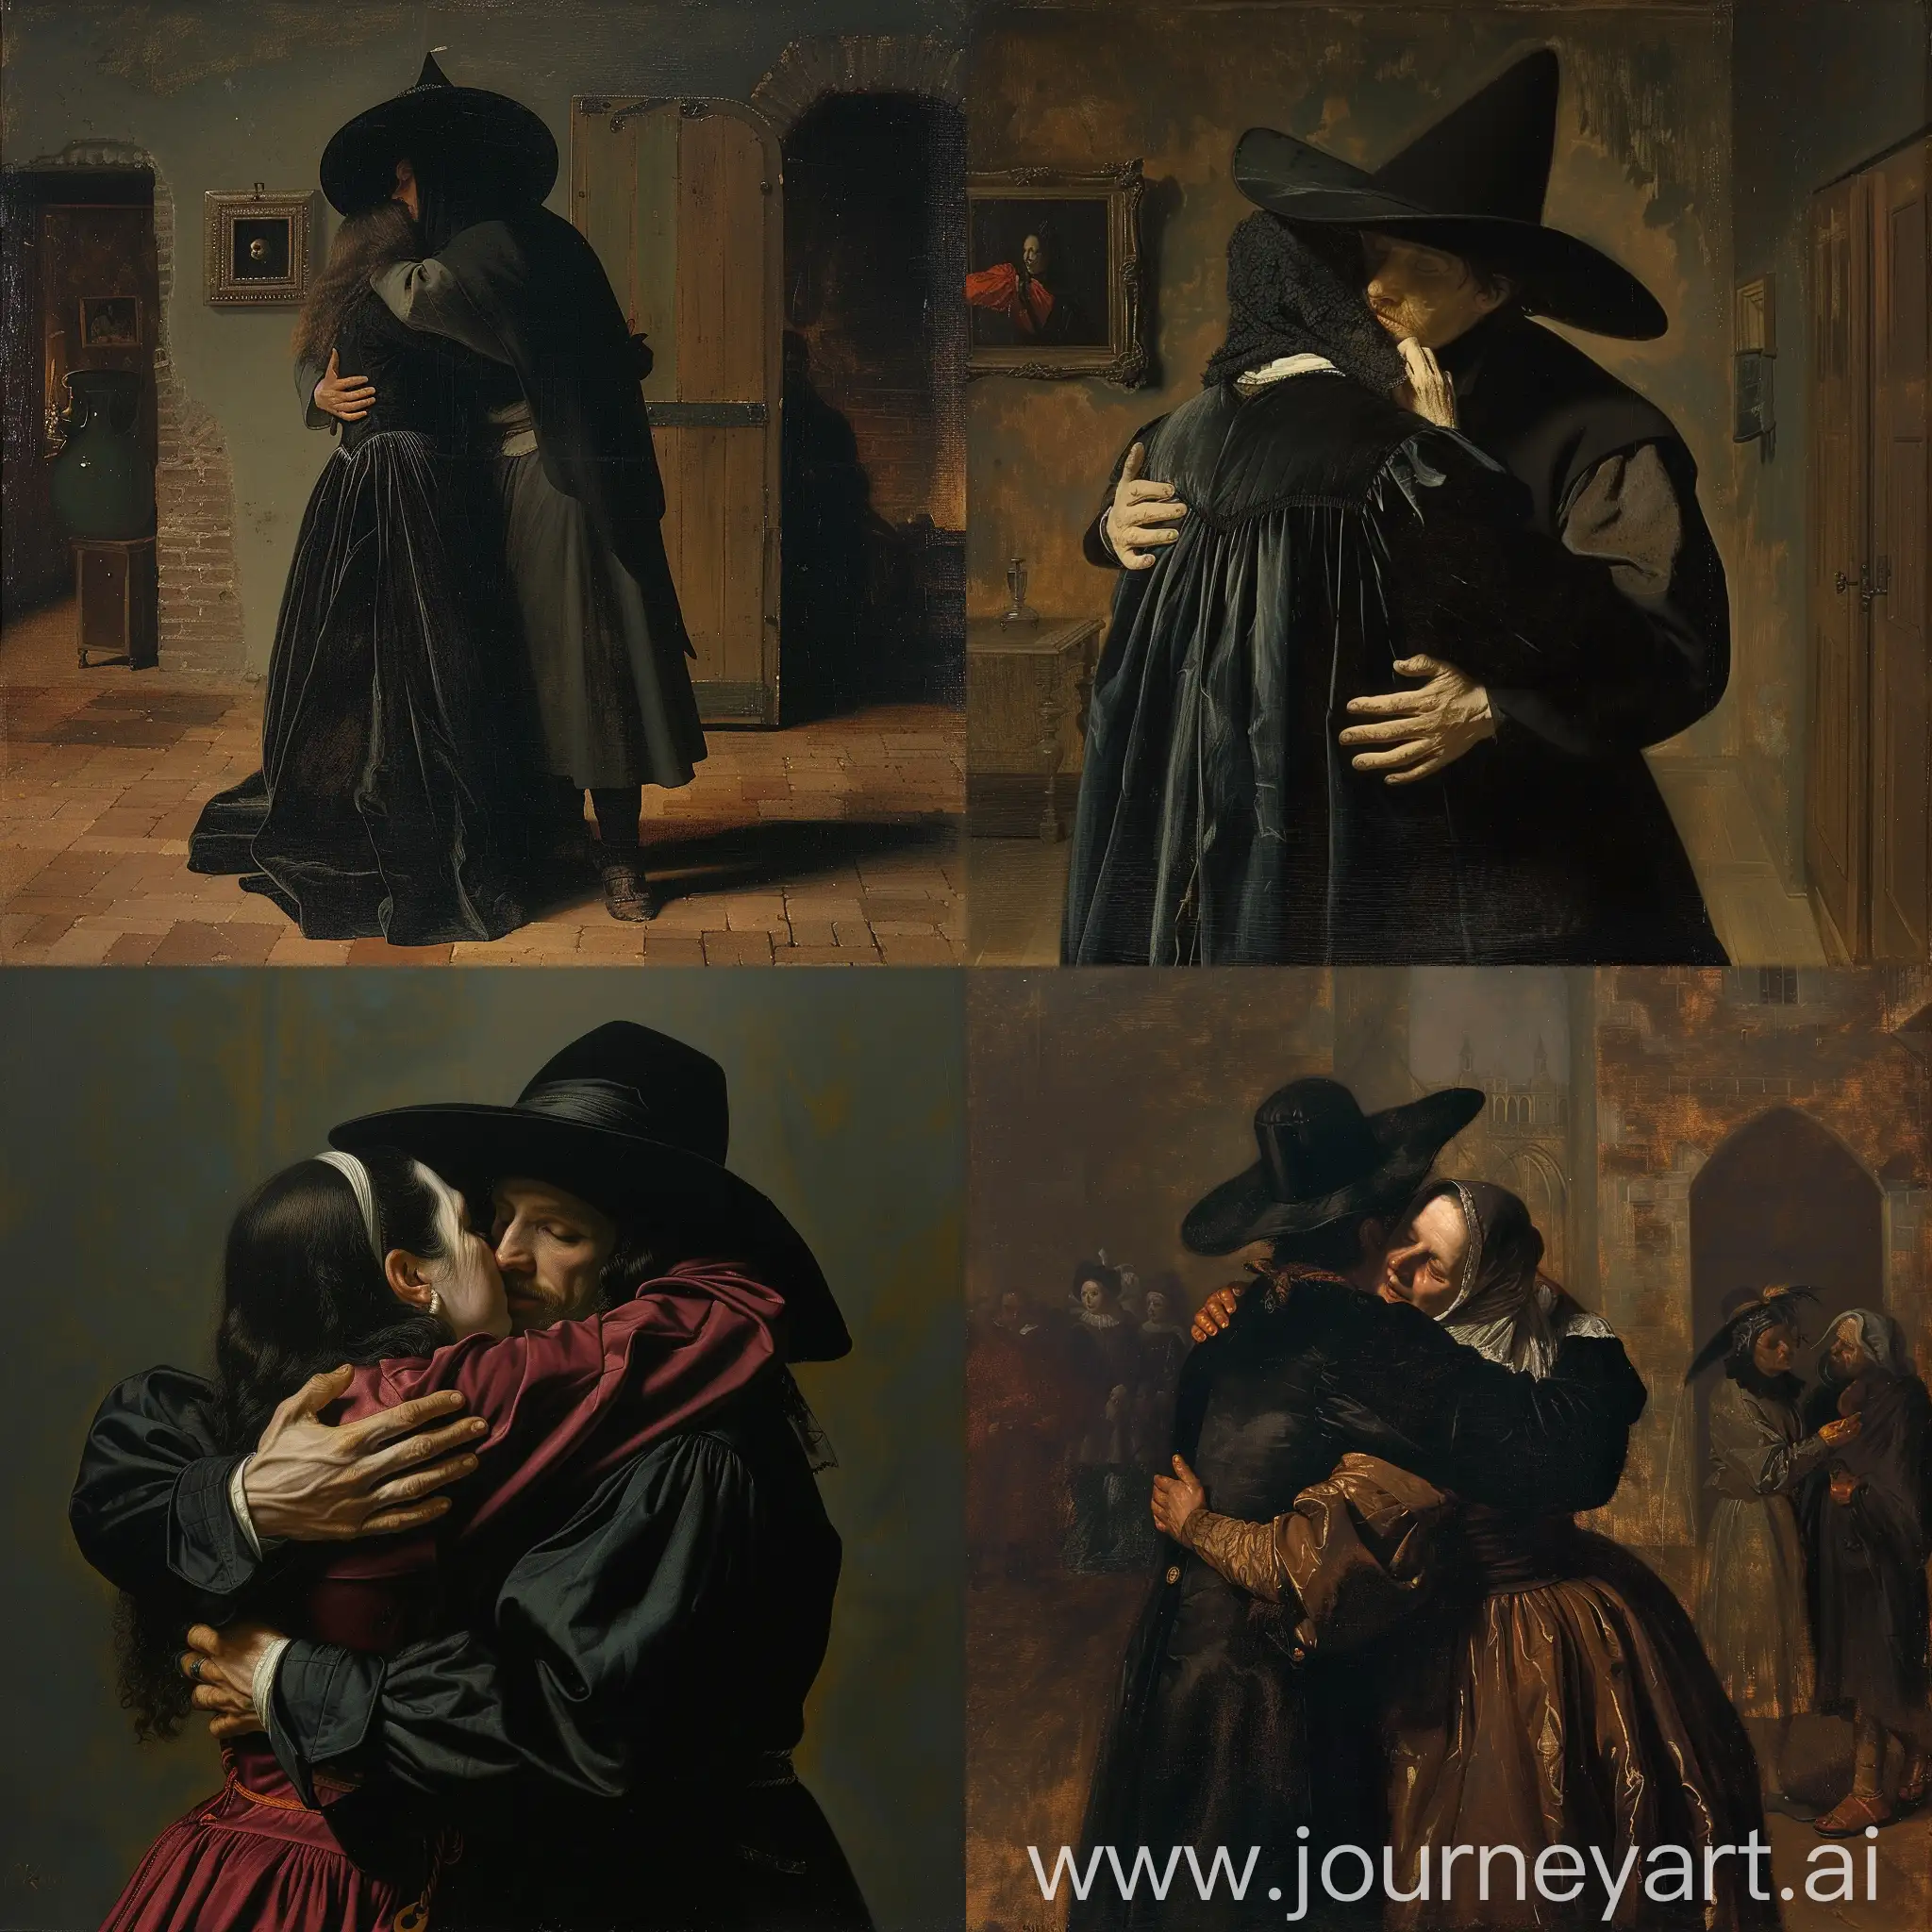 Spanish-Inquisitor-Embracing-Witch-Romantic-Scene-in-the-Style-of-Vermeer